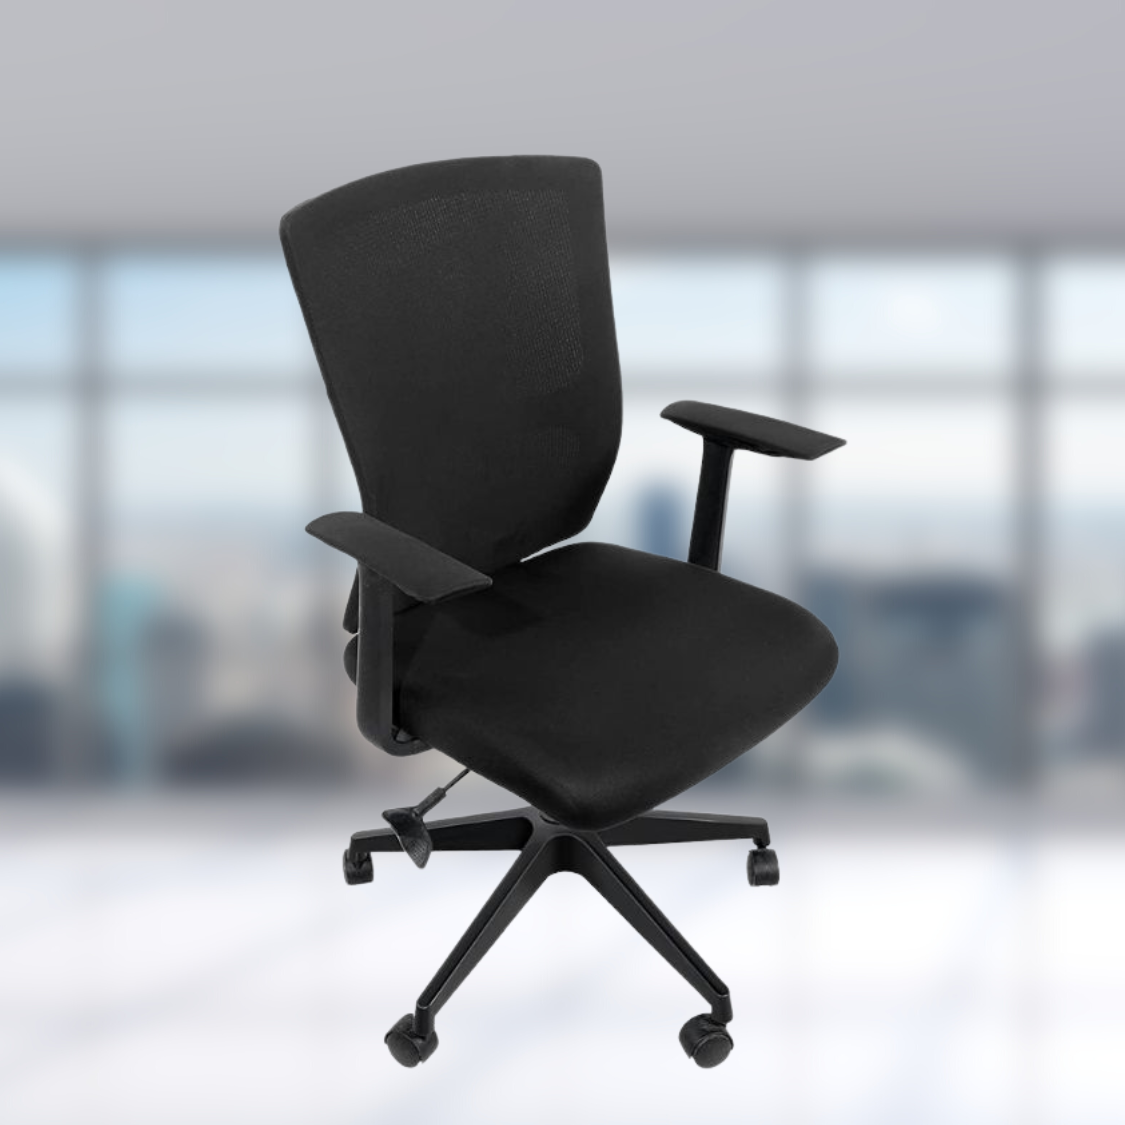 PENTHOOM Office Chair Cover Stretchable - Removable and Washable Computer Chair Cover - Black